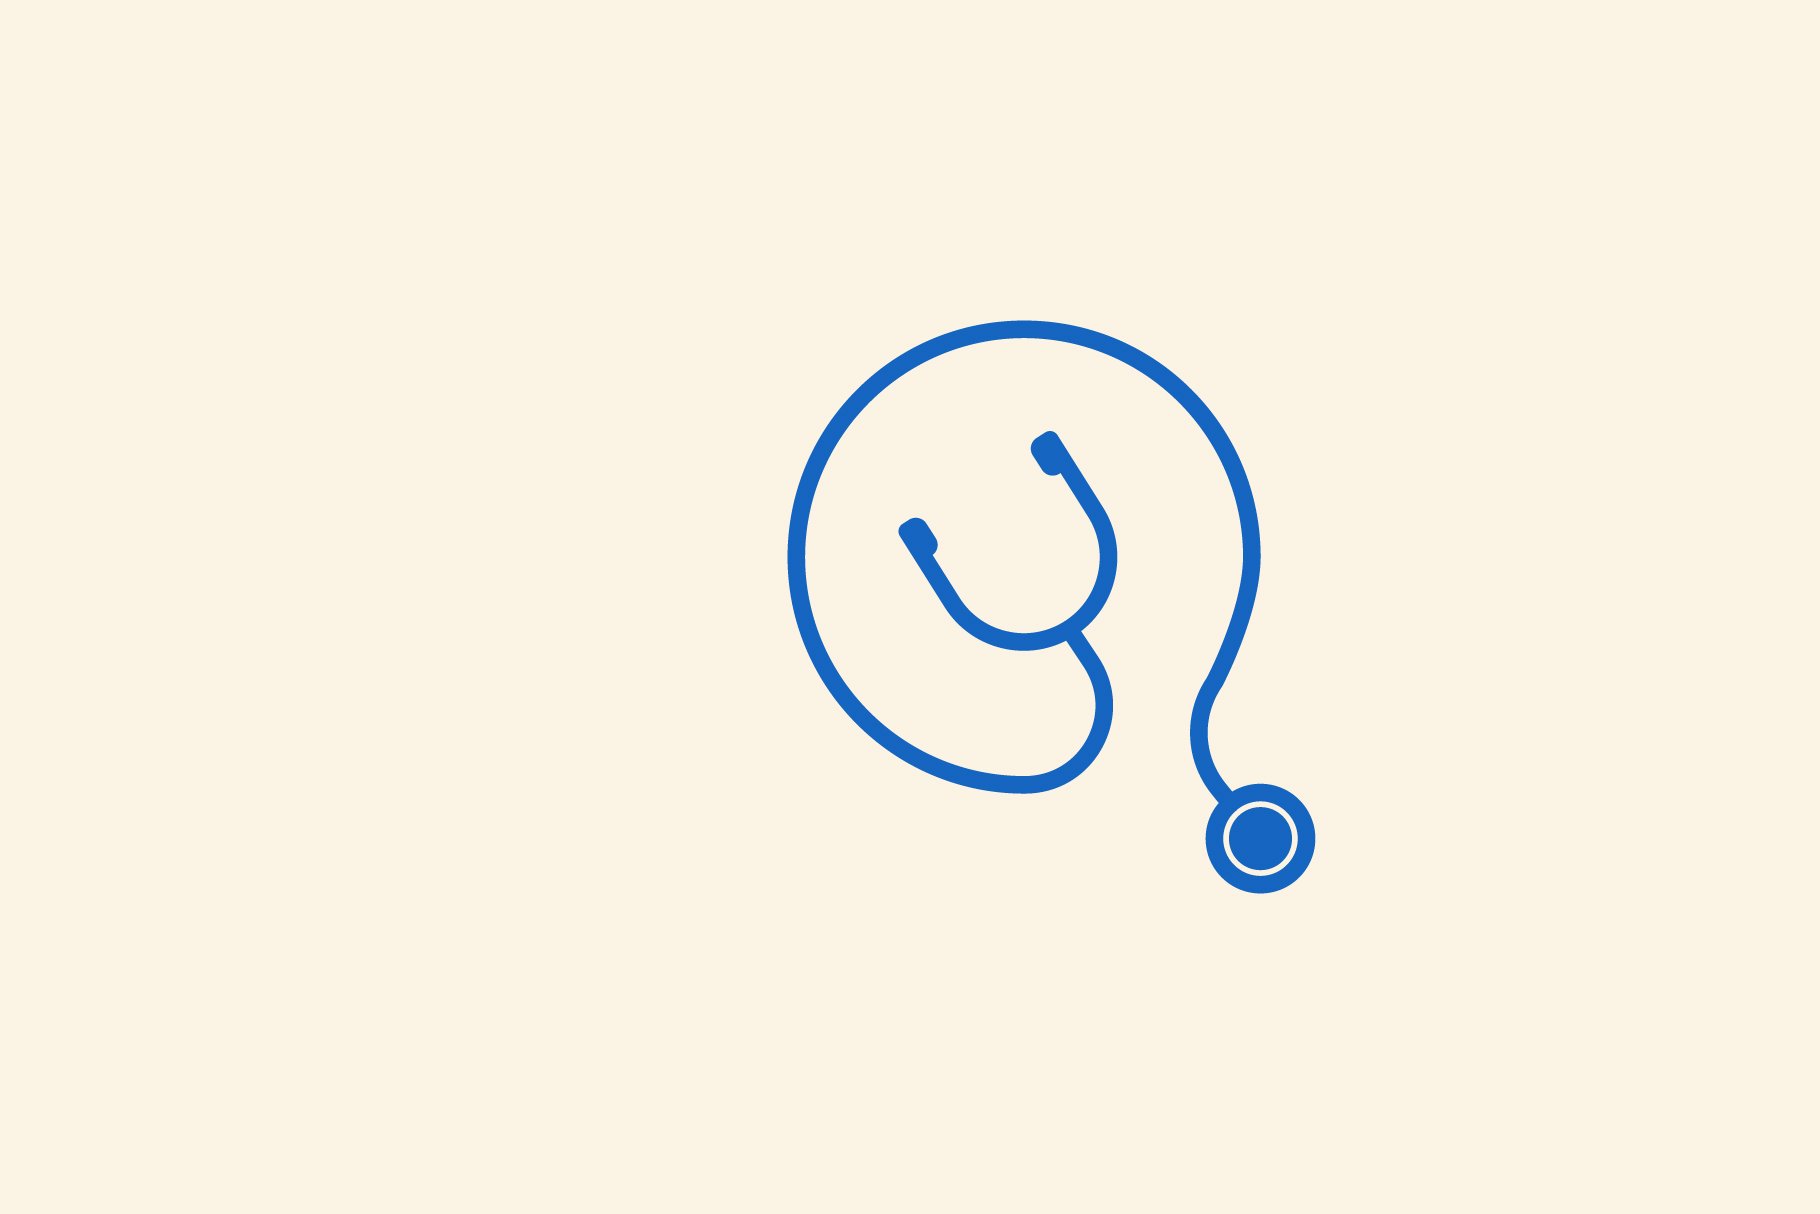 Medical health logo,STETHOSCOPE logo icon Template | PosterMyWall